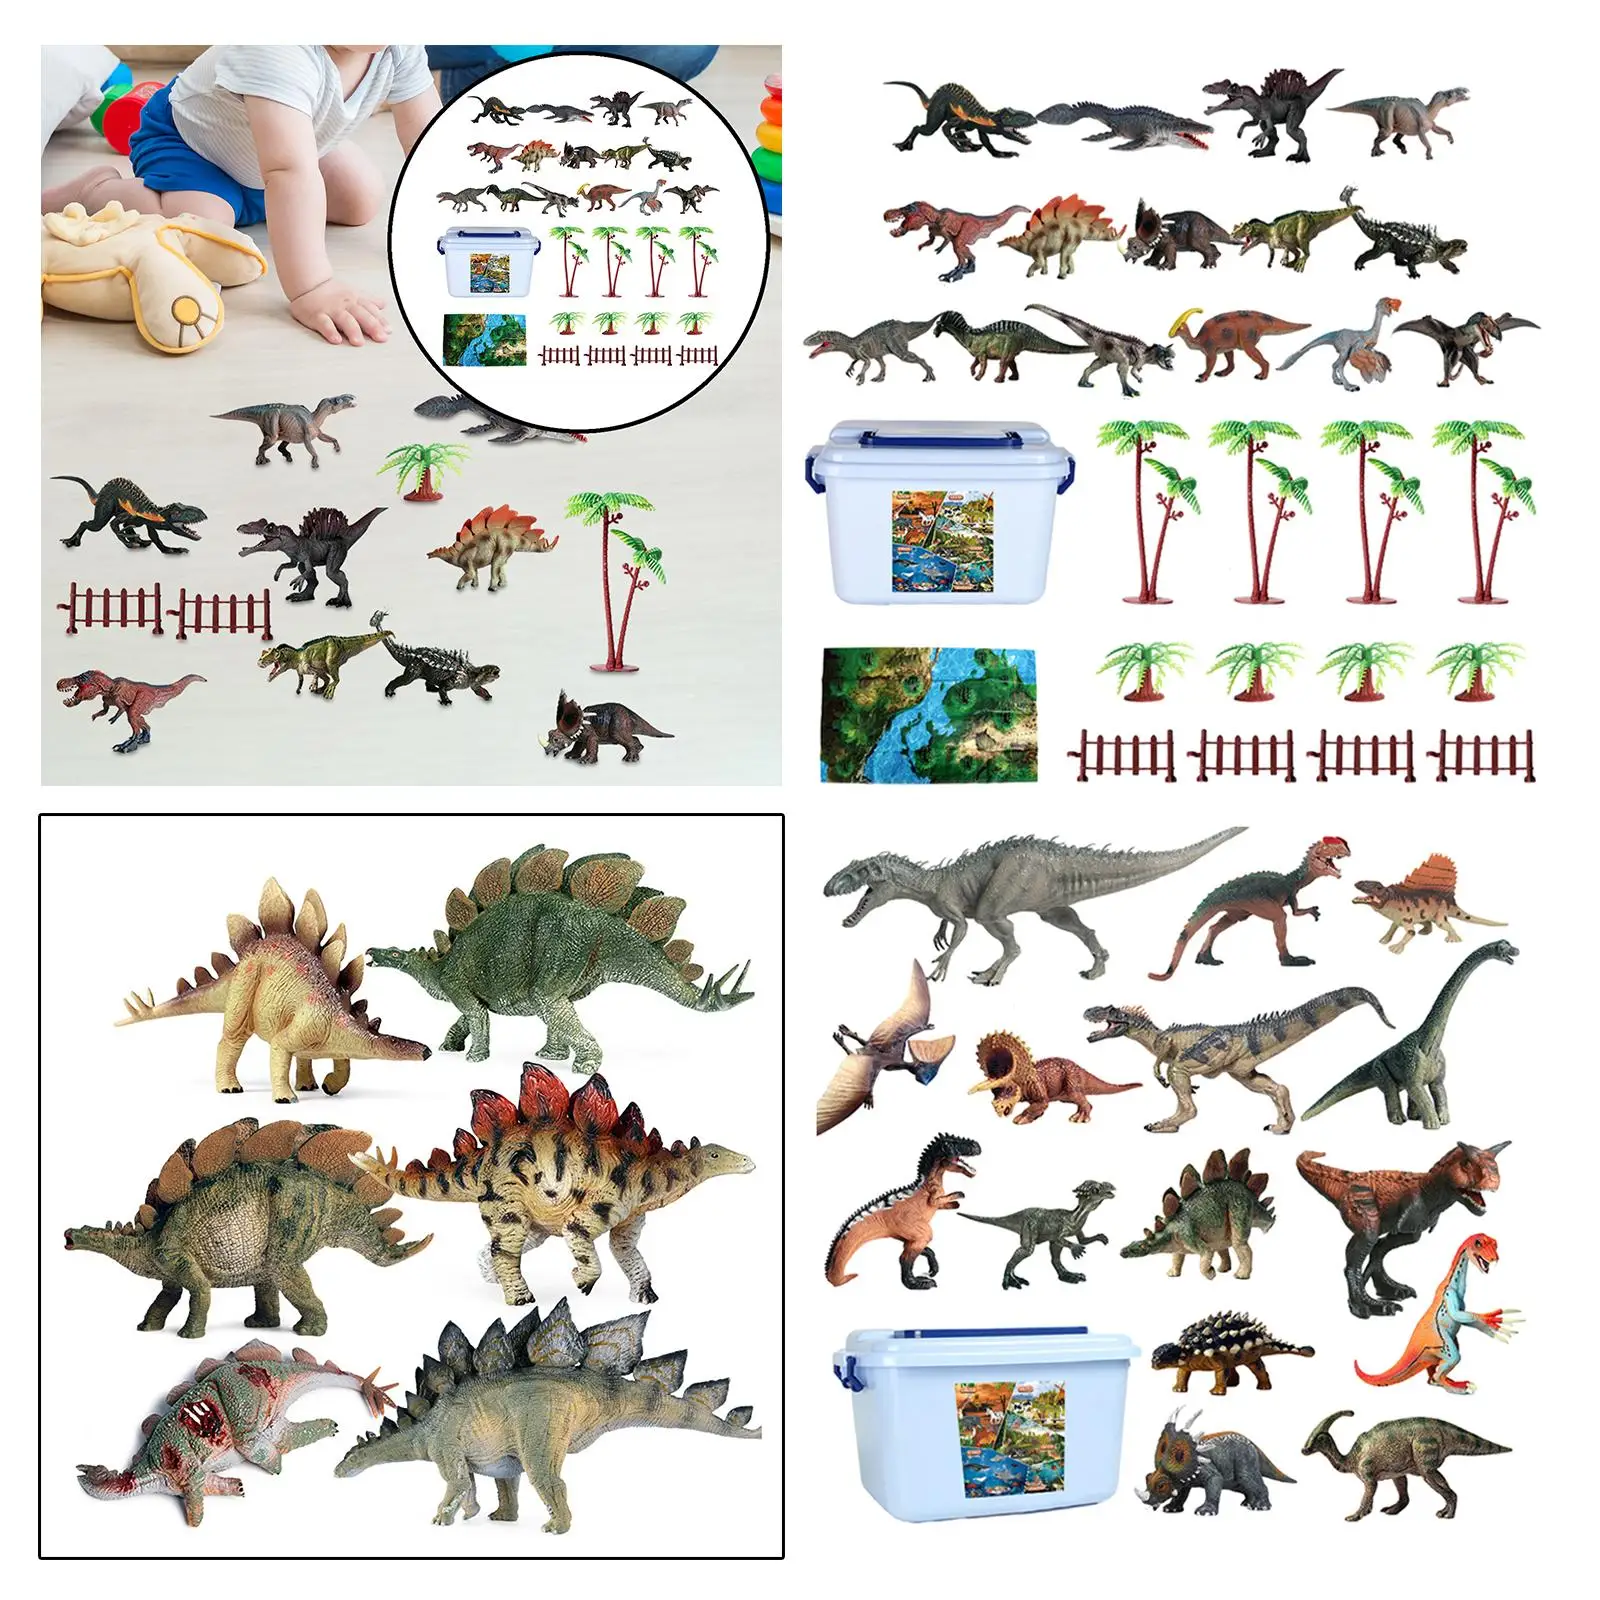 15x Toddlers Dinosaur Toys Wildlife Animal Figurine for New Year Cake Topper